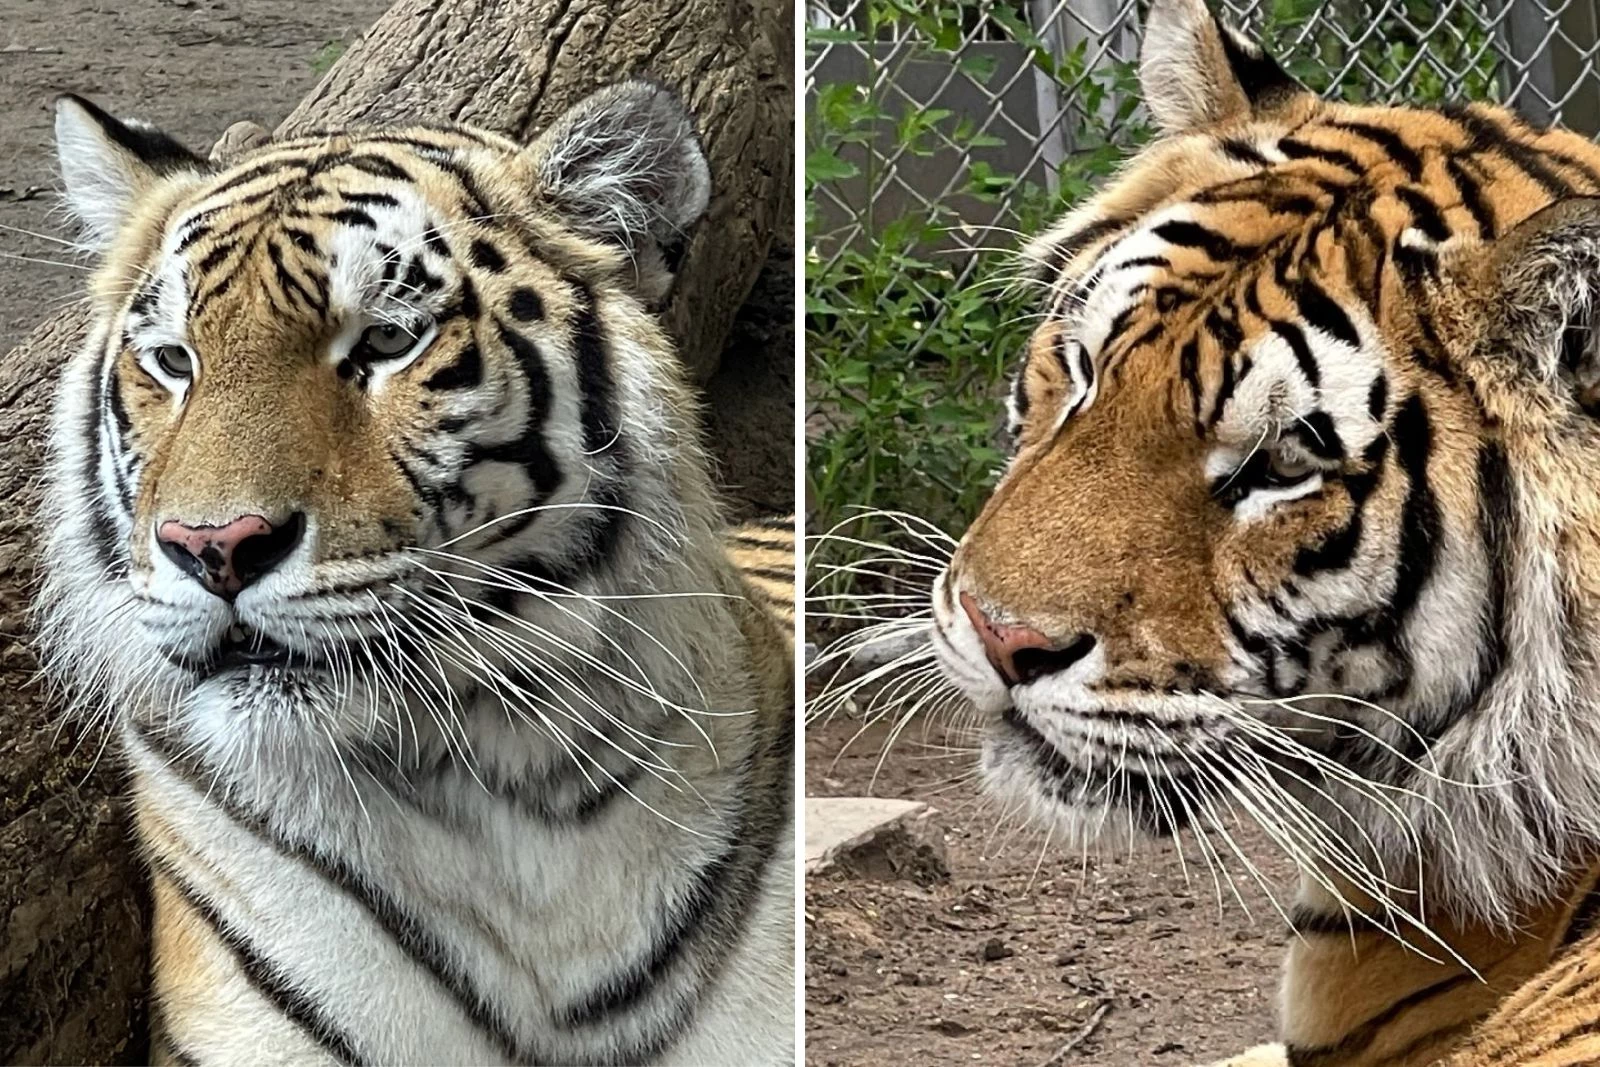 Popcorn Park Zoo welcomes new lions, tigers to NJ from Canada